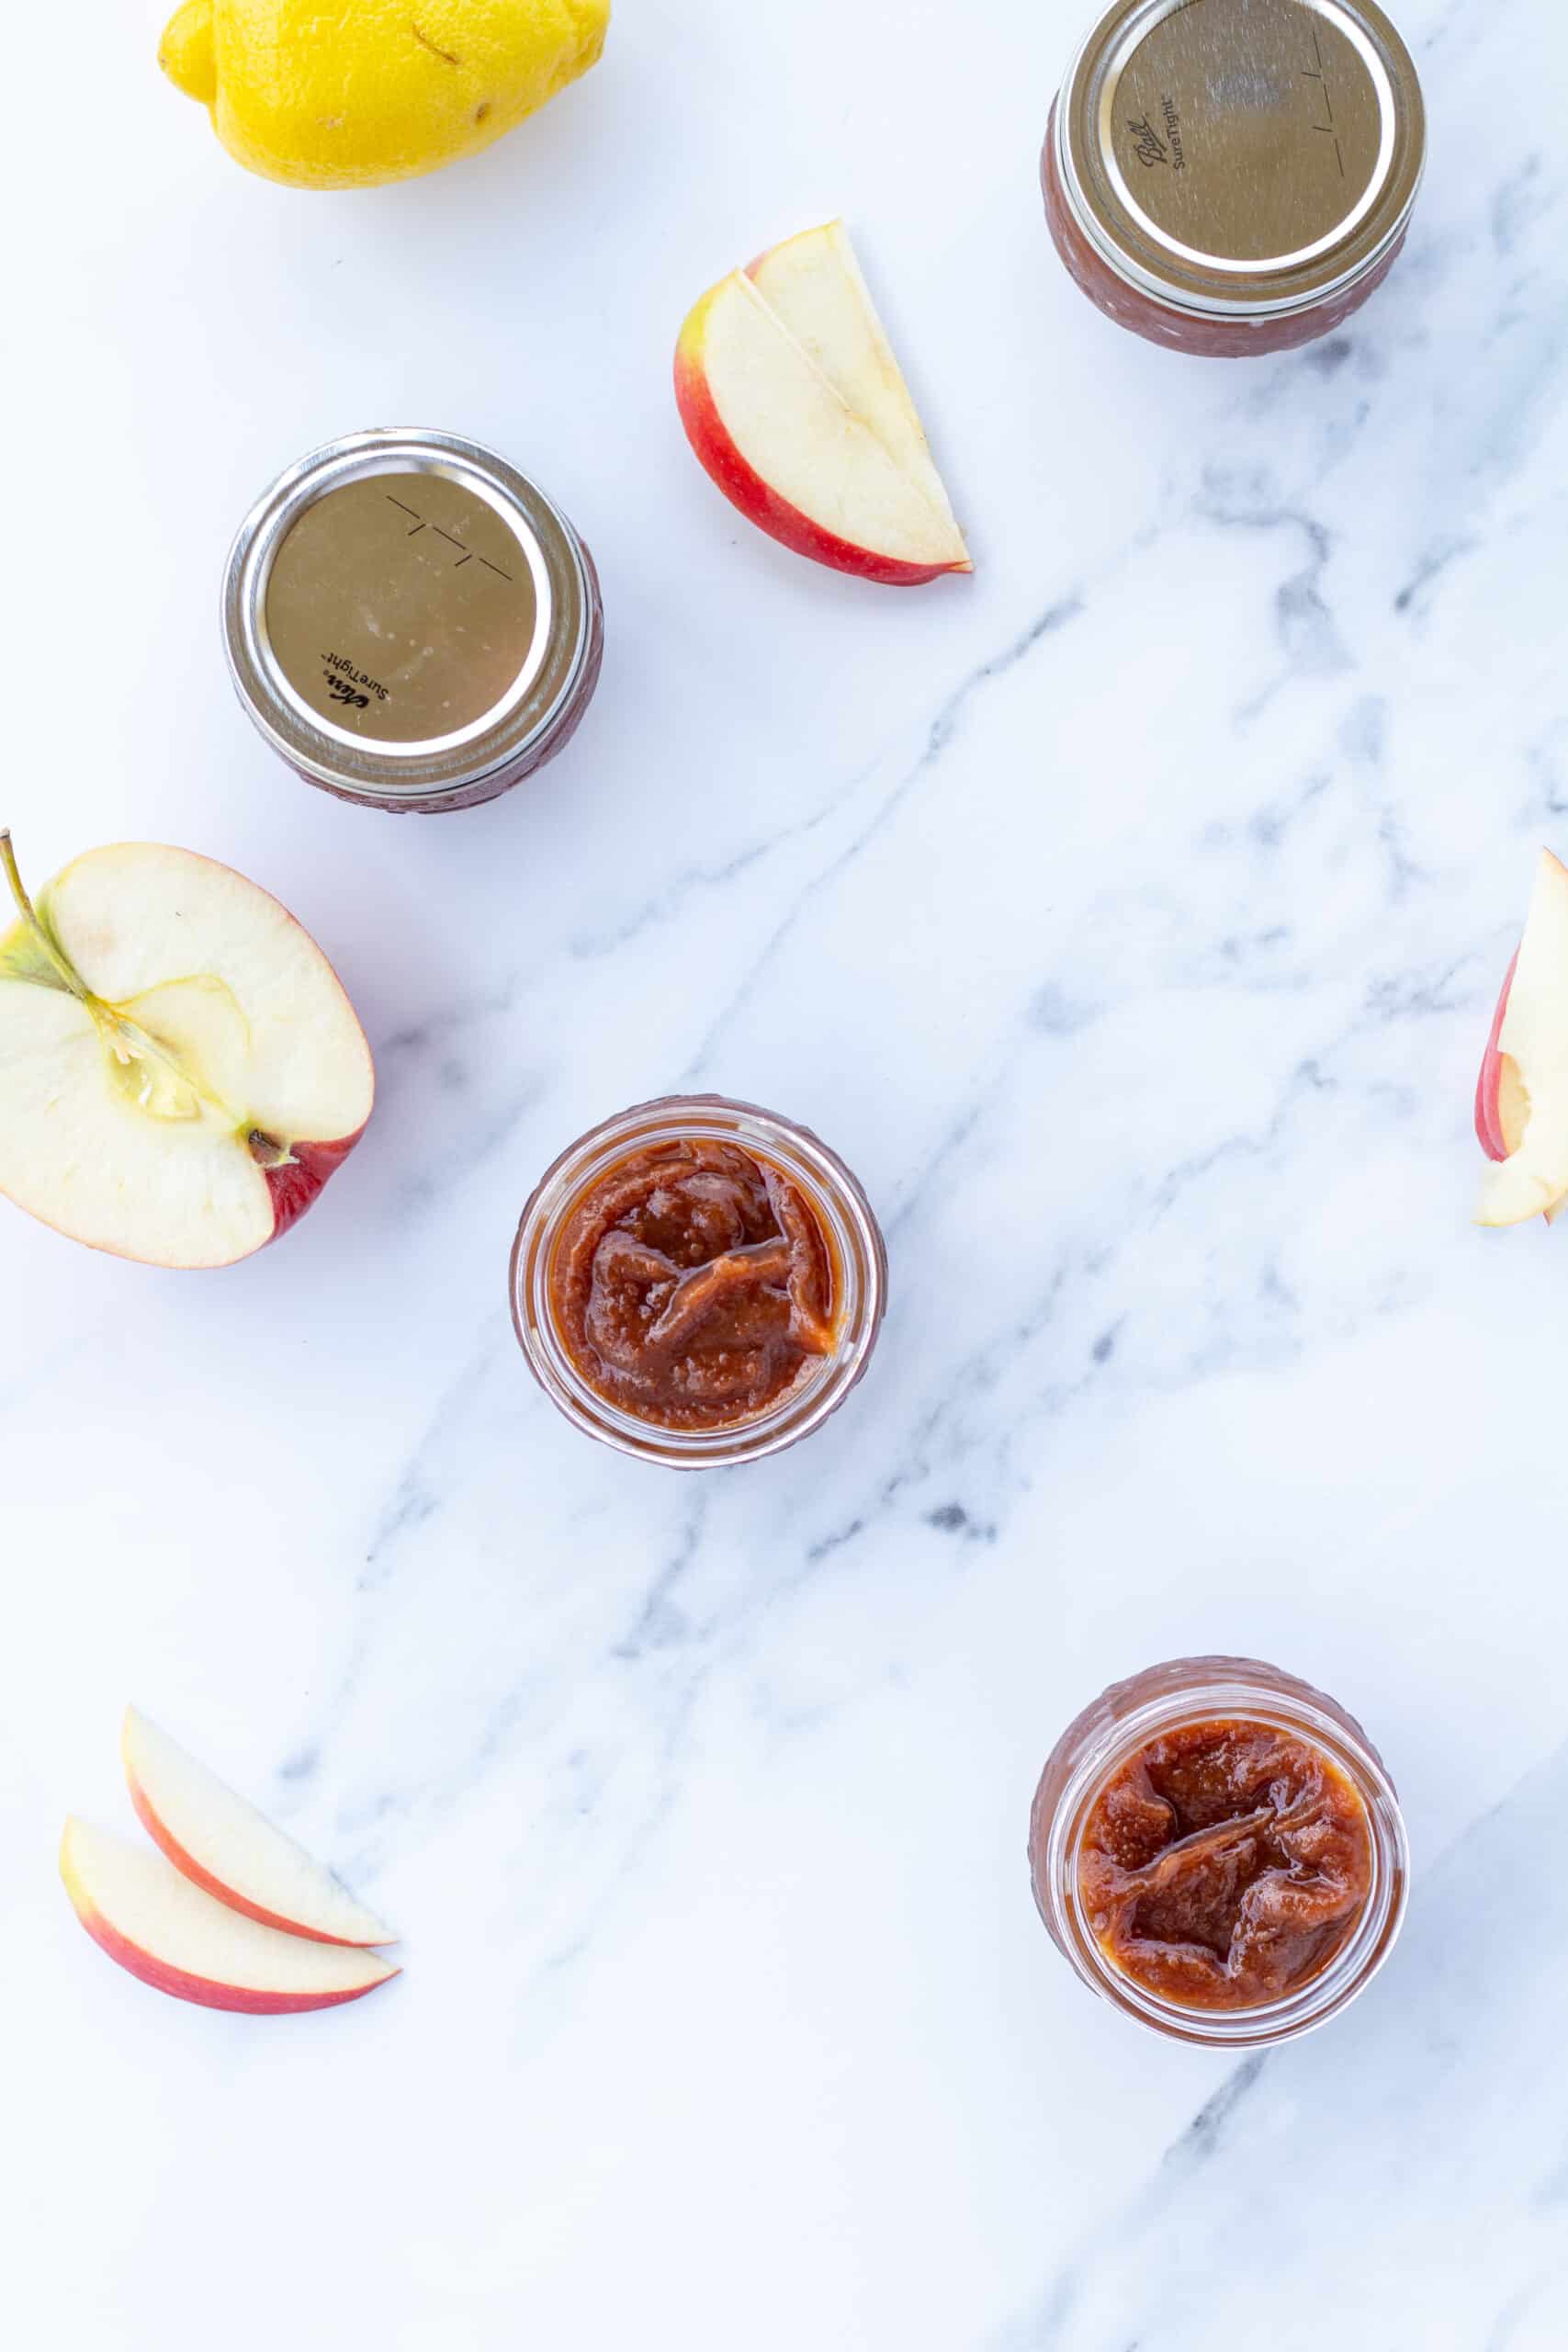 jars of apple butter, slices of apples, and a lemon sitting on a white counter